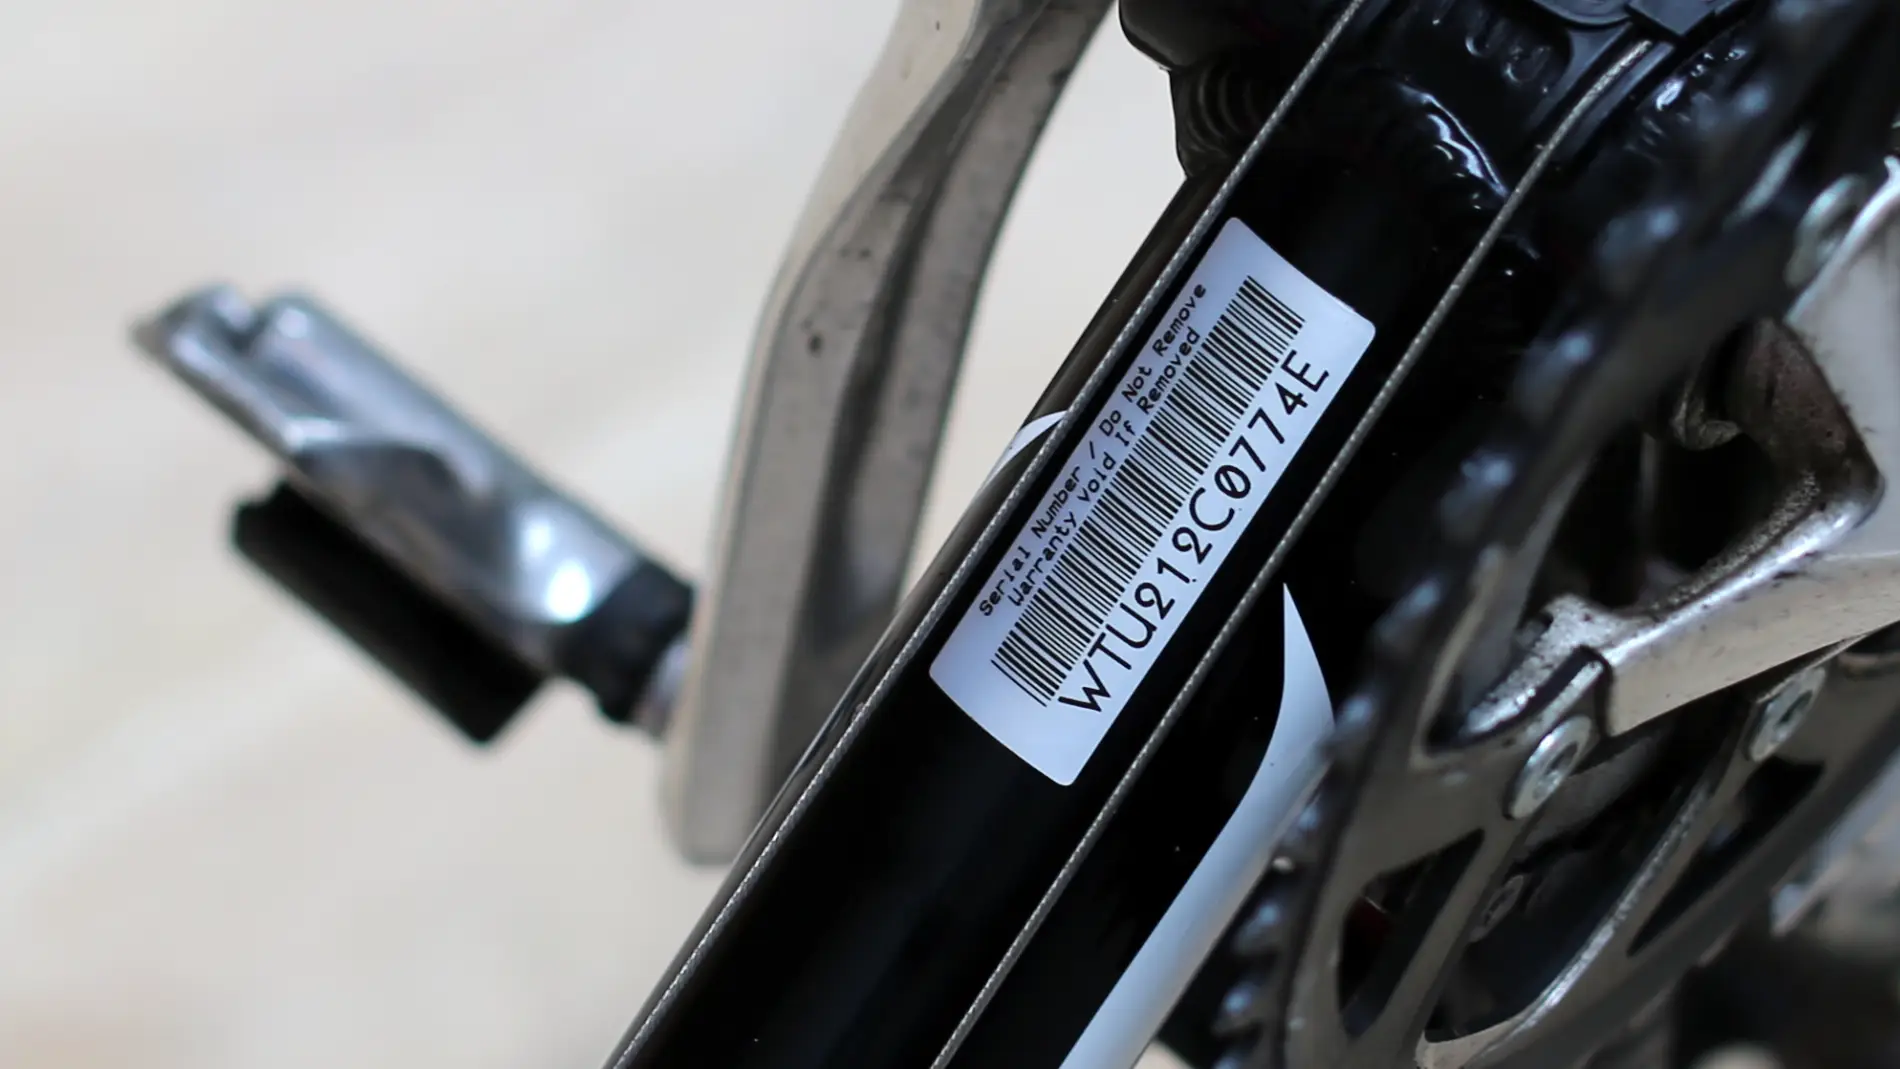 Search bikes by serial number